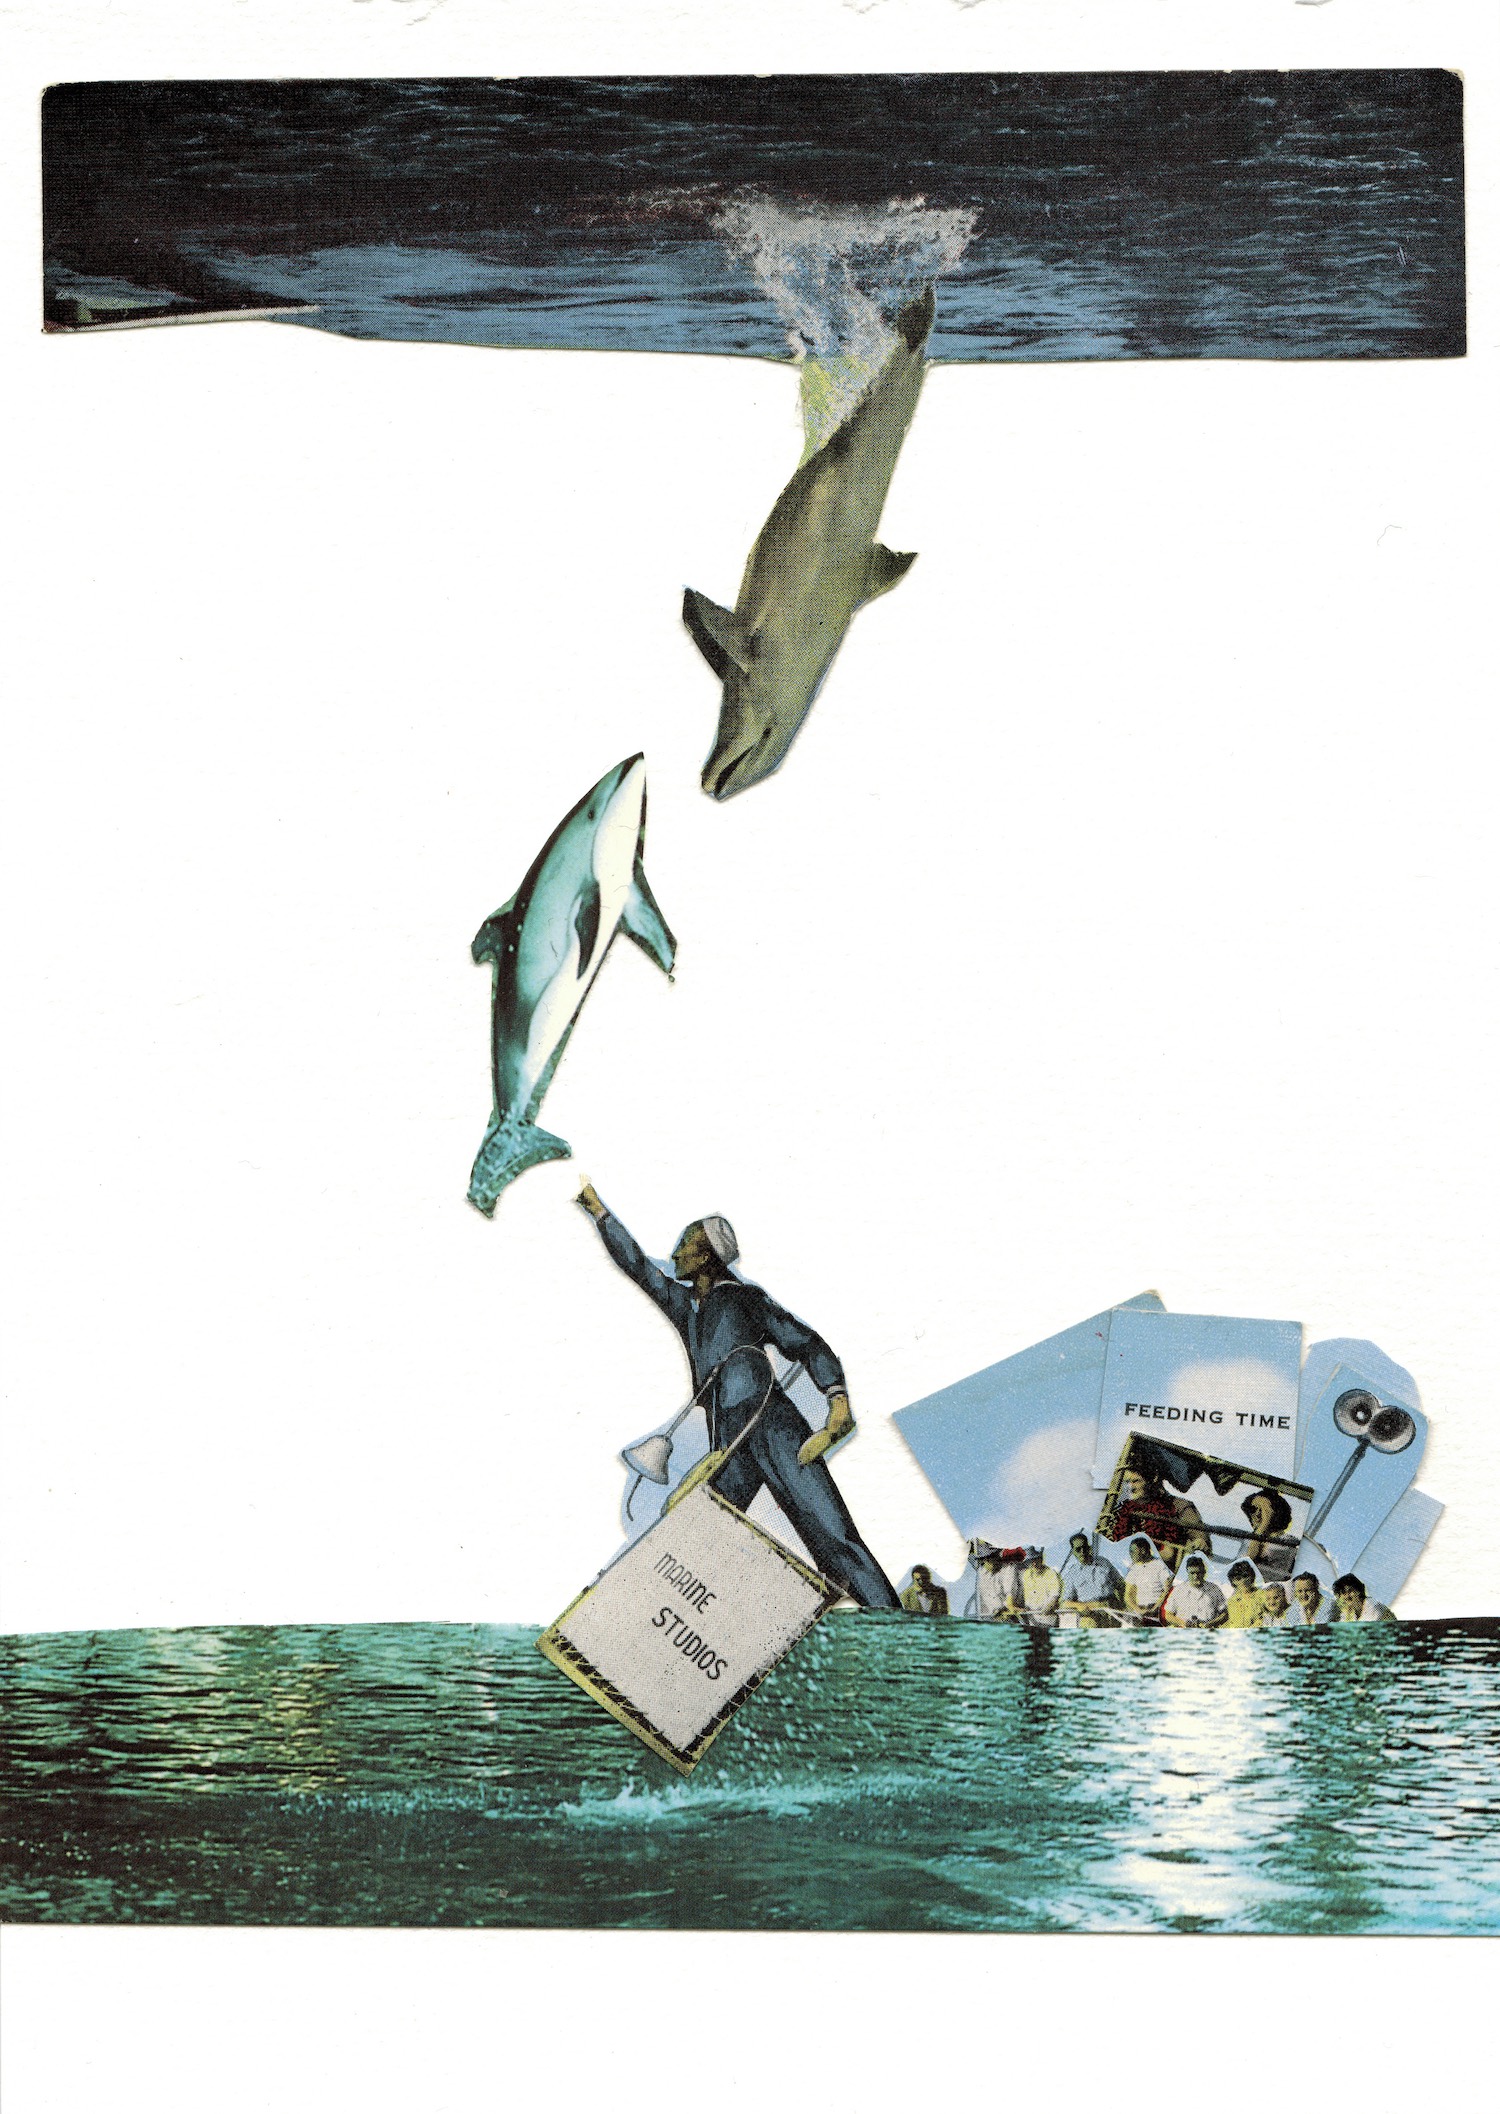 A watery collage composed of old postcards from the 1950s. There is water at the bottom of the image, which is mirrored by water at the top of the image. An upside down world, a reflection reaching out to meet the one below. At the bottom right of the image, a cluster of spectators watch on. There is a loud speaker behind them and a sign that reads, feeding time. In the foreground, rising out of the water, a sailor reaches upwards. His finger is almost touching the tail of a dolphin which is leaping upwards into the white sky. From the water above, a dolphin leaps out of the waves to meet it. Their noses close to touching in the space between worlds.